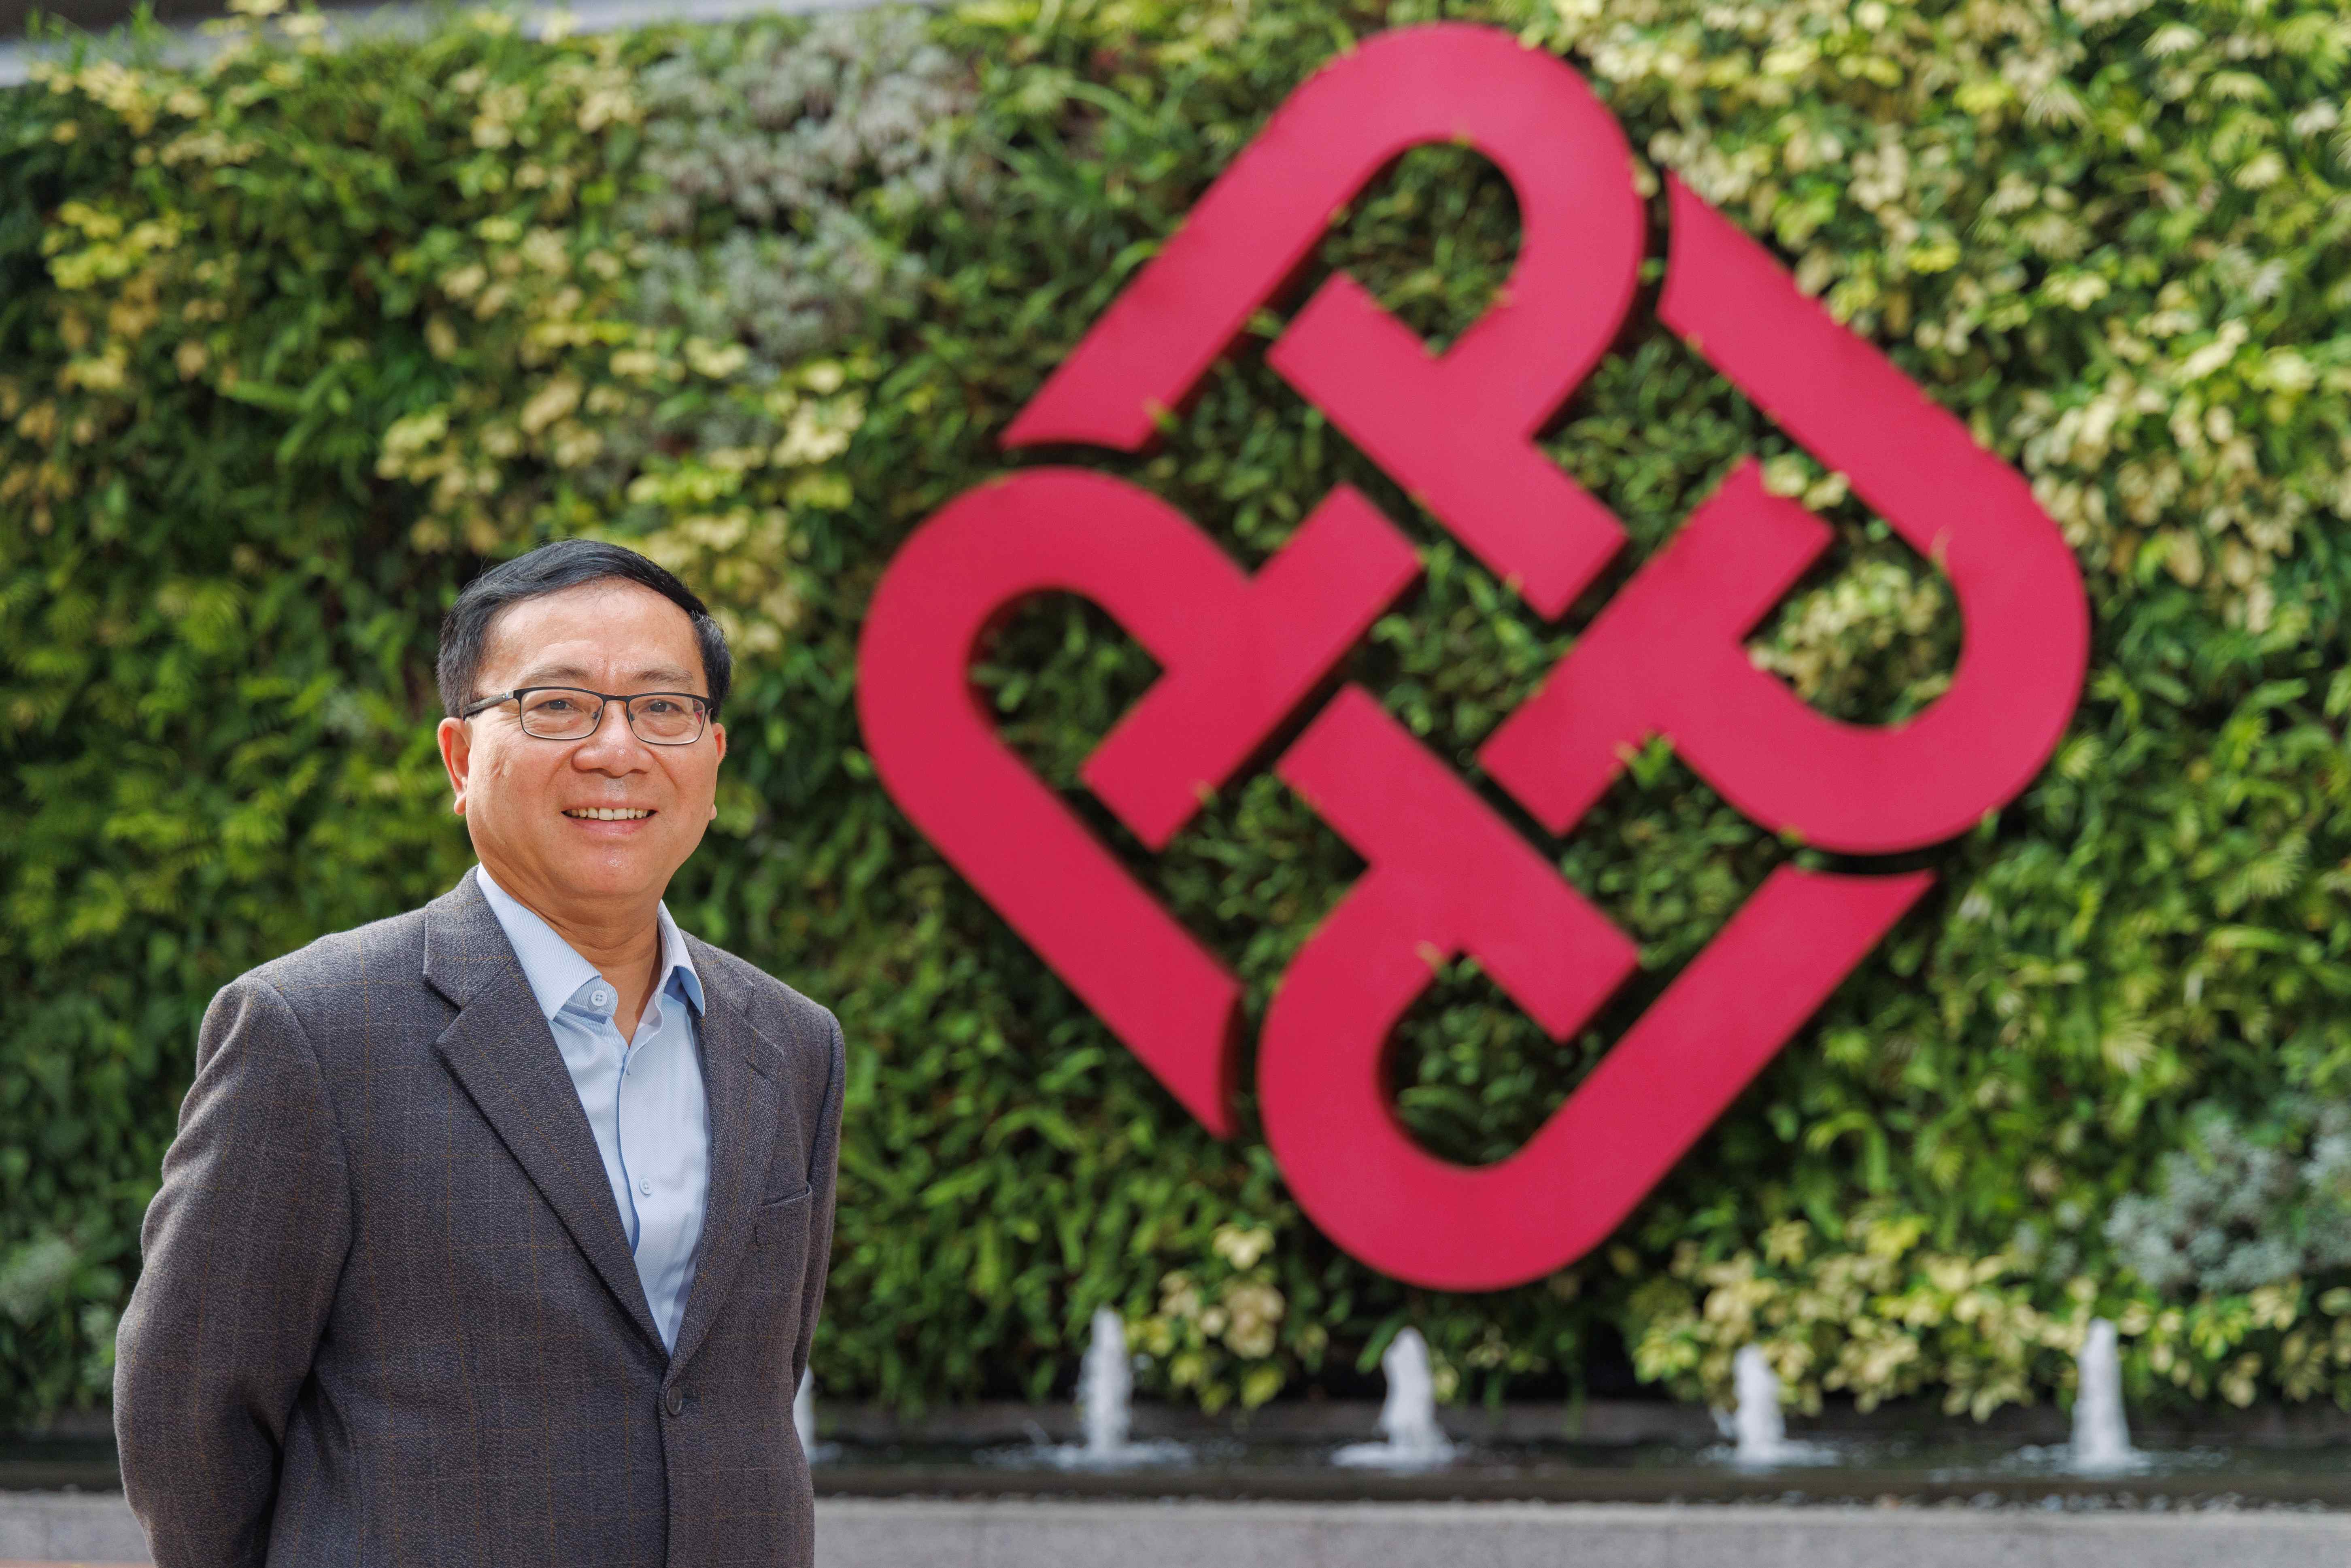 A study by Prof. Hai Guo, Professor of the Department of Civil and Environmental Engineering at PolyU and global researchers shows the effectiveness of green interventions in cooling temperatures across various regions.